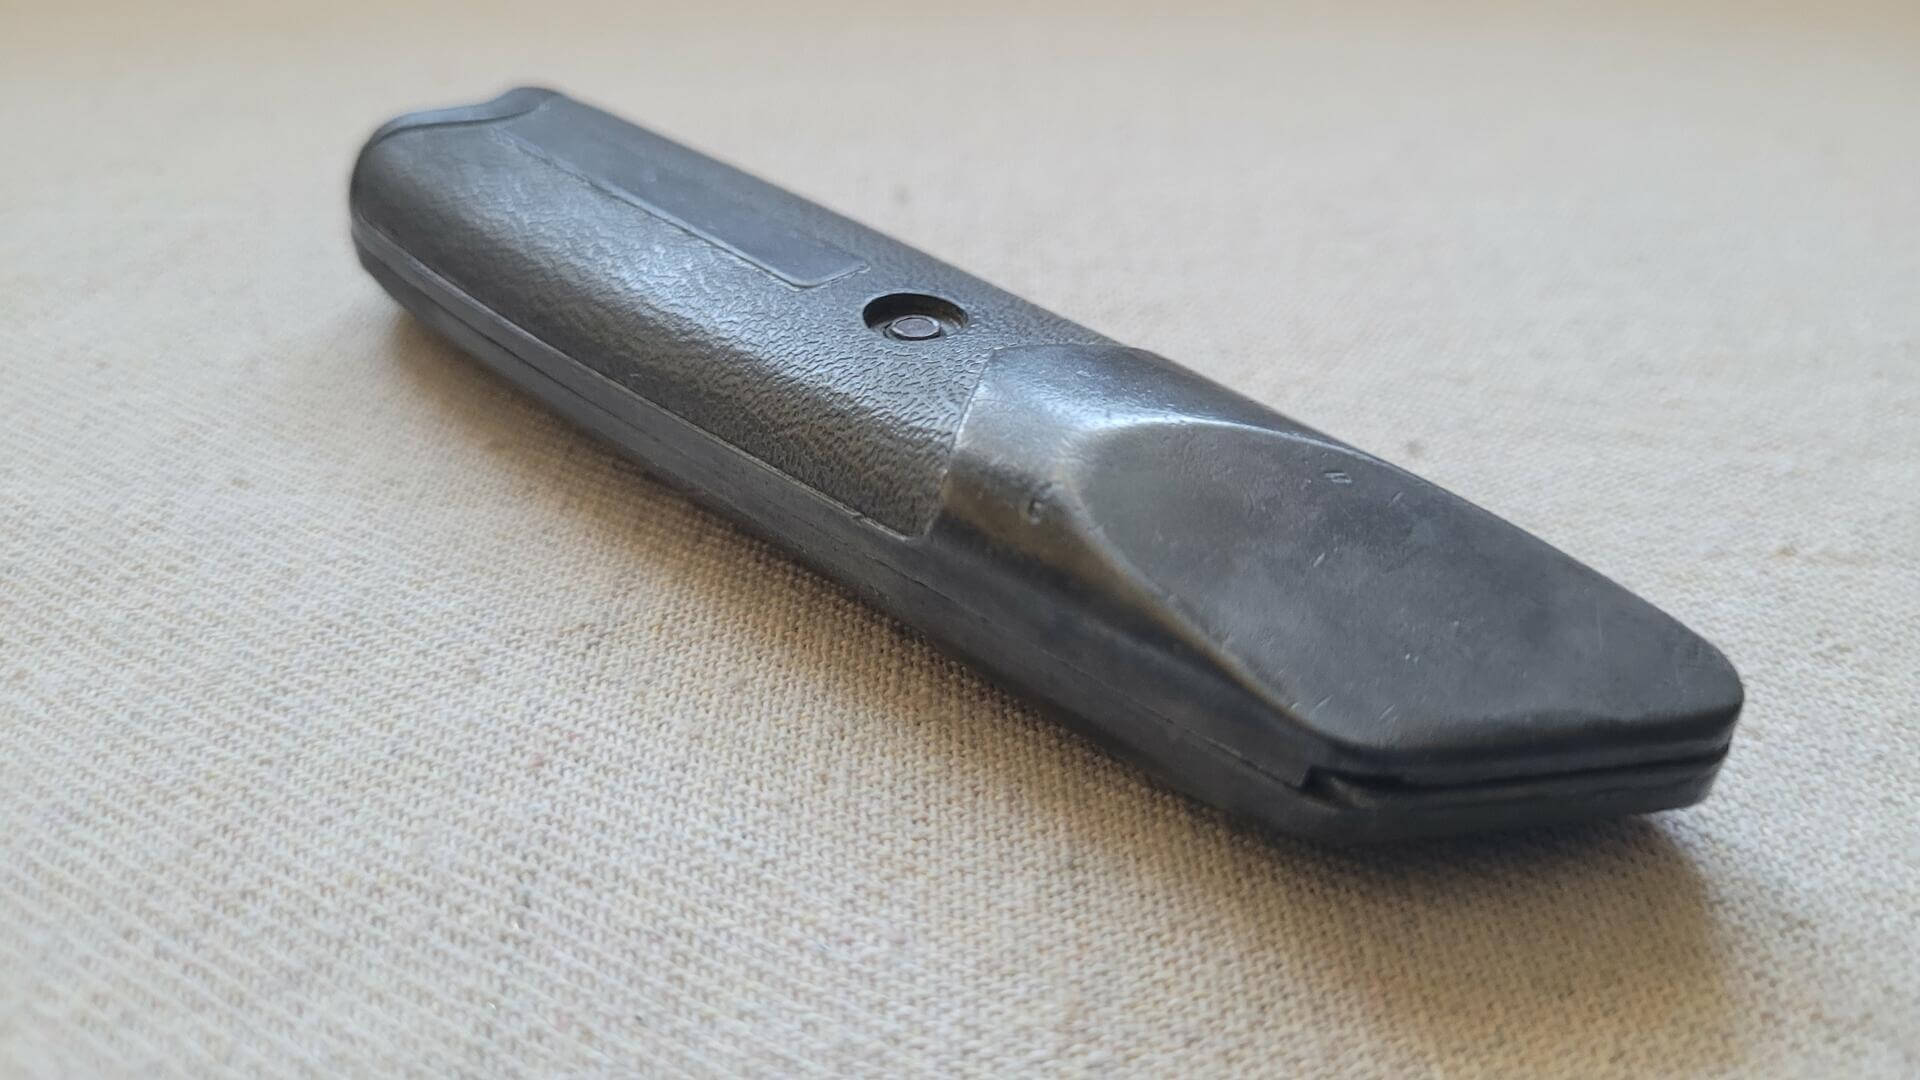 Vintage Stanley 1299 fixed blade cast steel utility knife box cutter. Antique made in USA collectible classic mid century design cutting hand tools